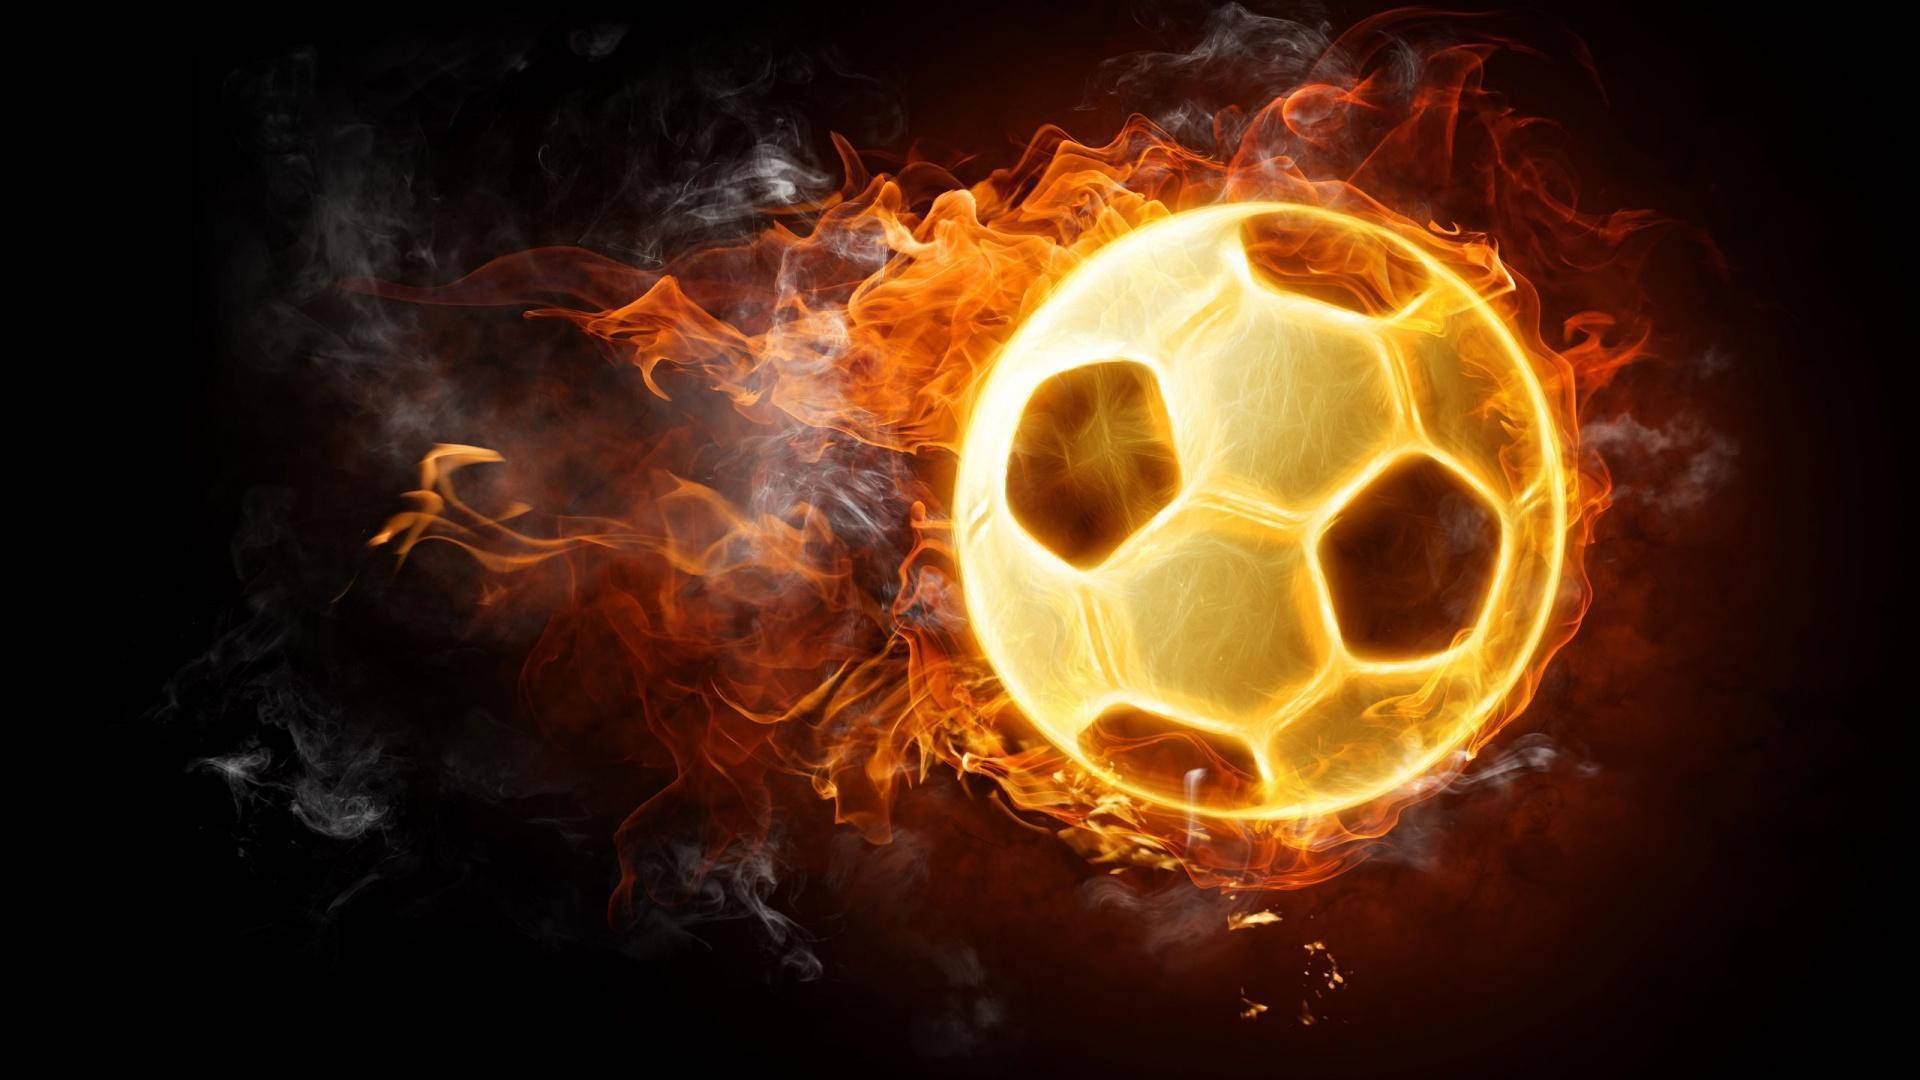 1080p Hd Flaming Soccer Ball Background